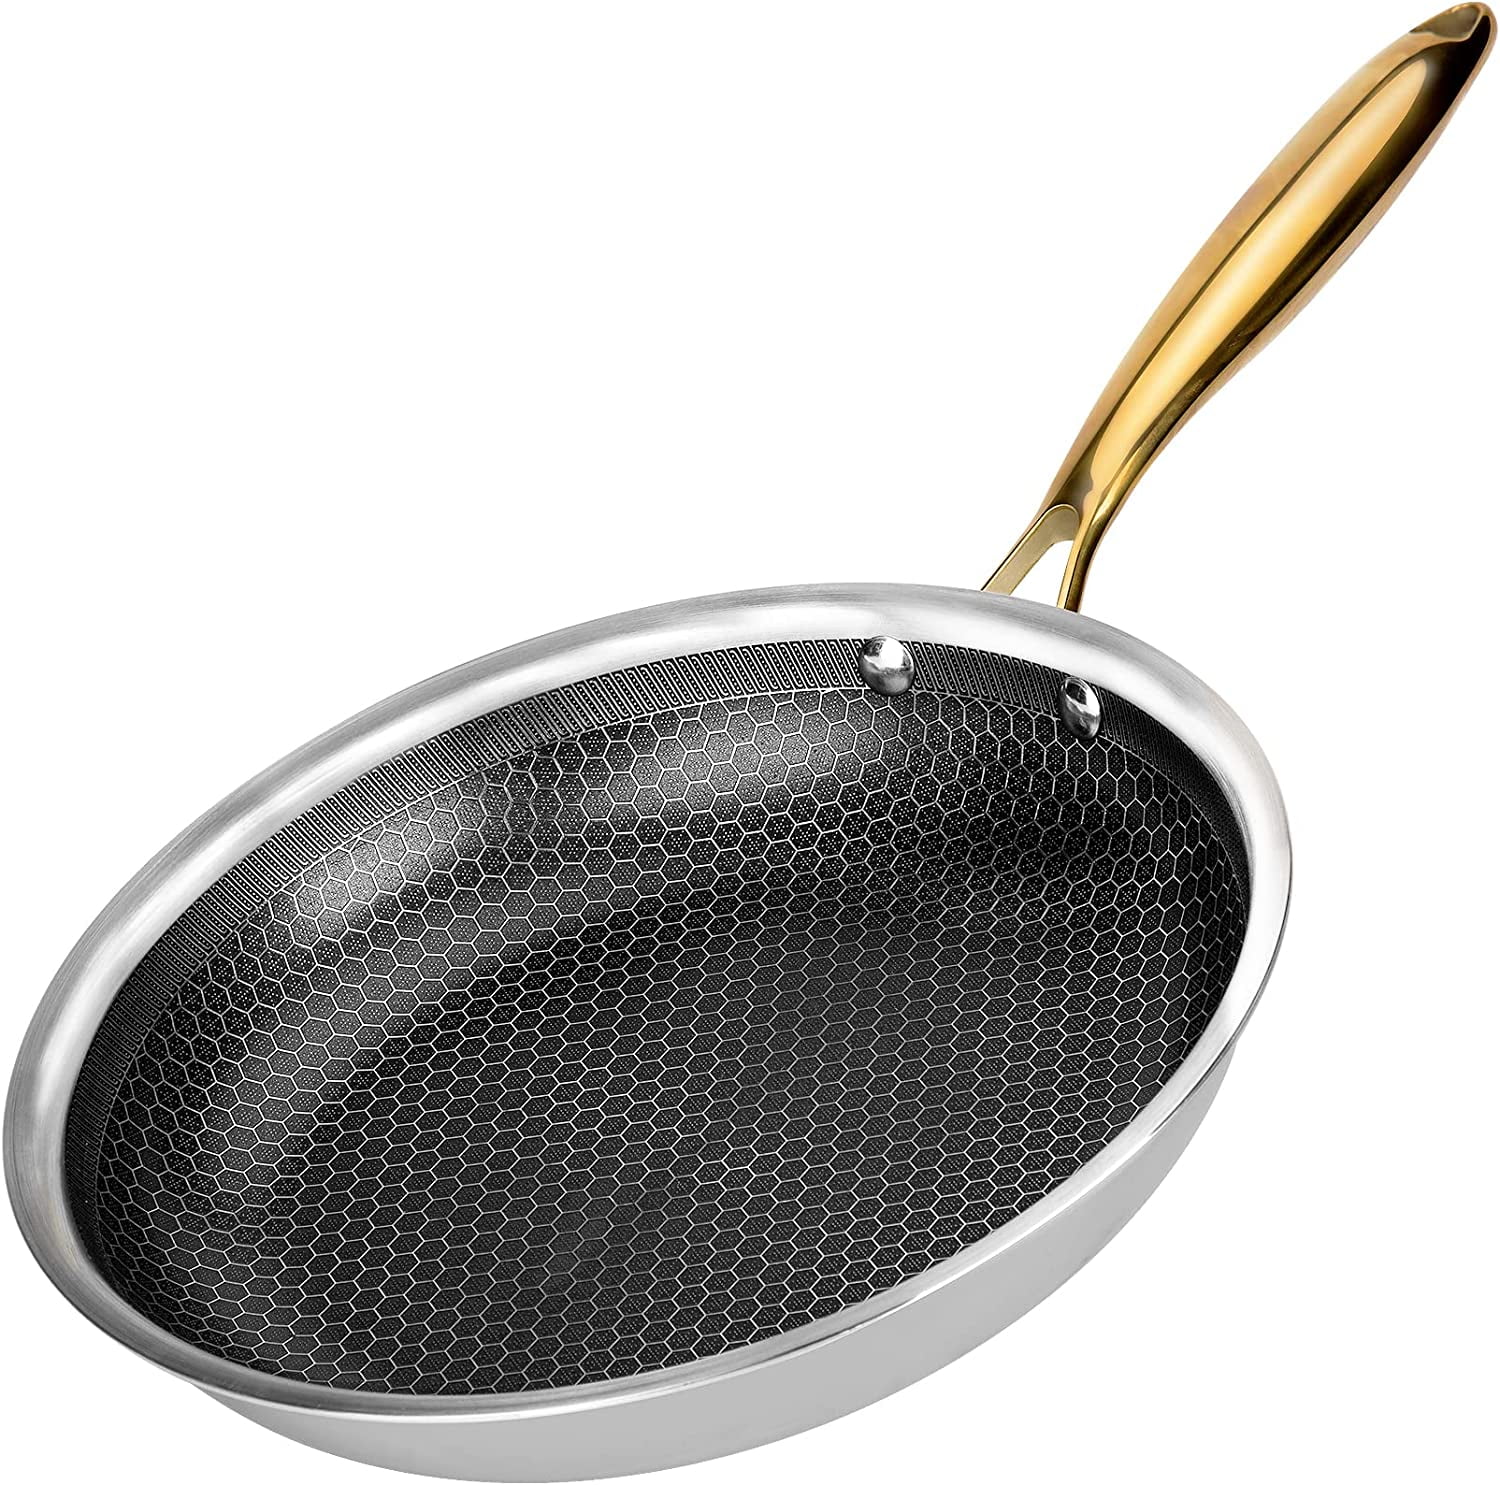 imarku Frying Pan - 12inch Non Stick Frying Pan Honeycomb Cast Iron  Skillets, Large Frying Pans Nonstick Dishwasher Safe, Oven Safe Kitchen  Pans for